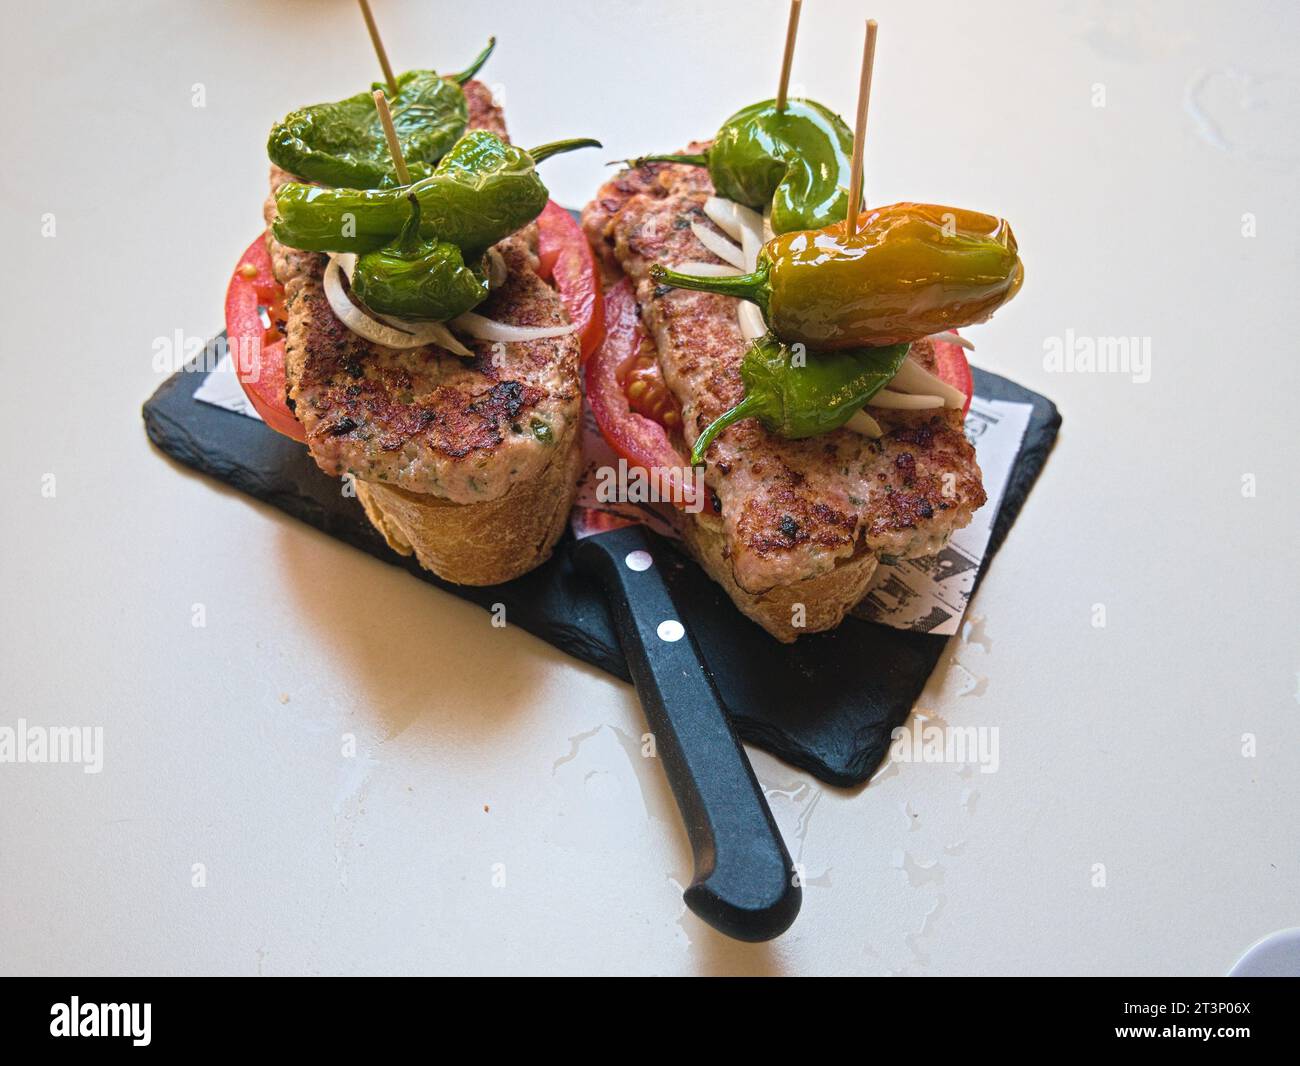 Montadito, open sandwich served in Spain Stock Photo